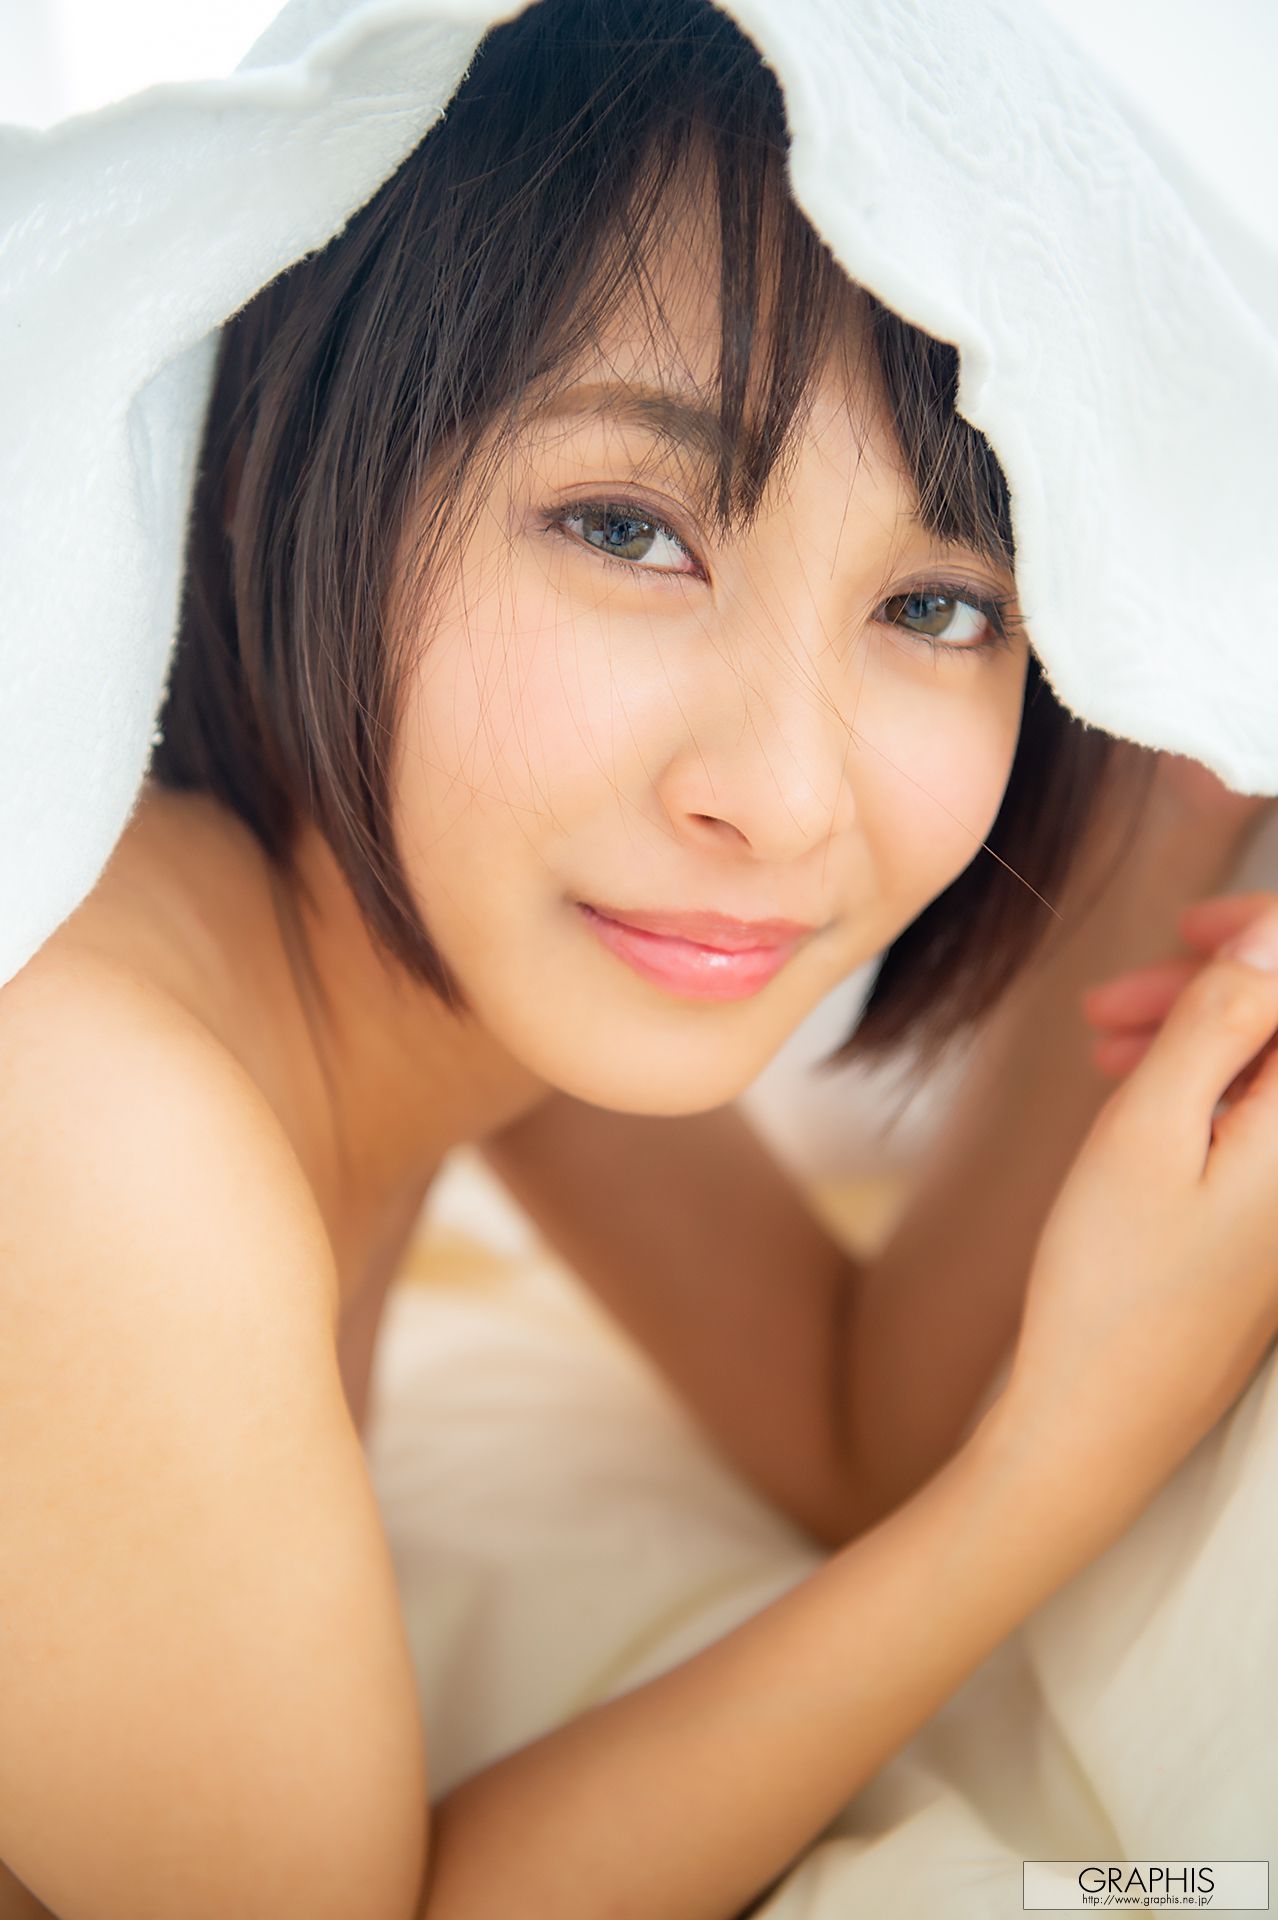 [Graphis] First Gravure 初脱ぎ娘 No.164 Rika Aimi 逢見リカ  第61张